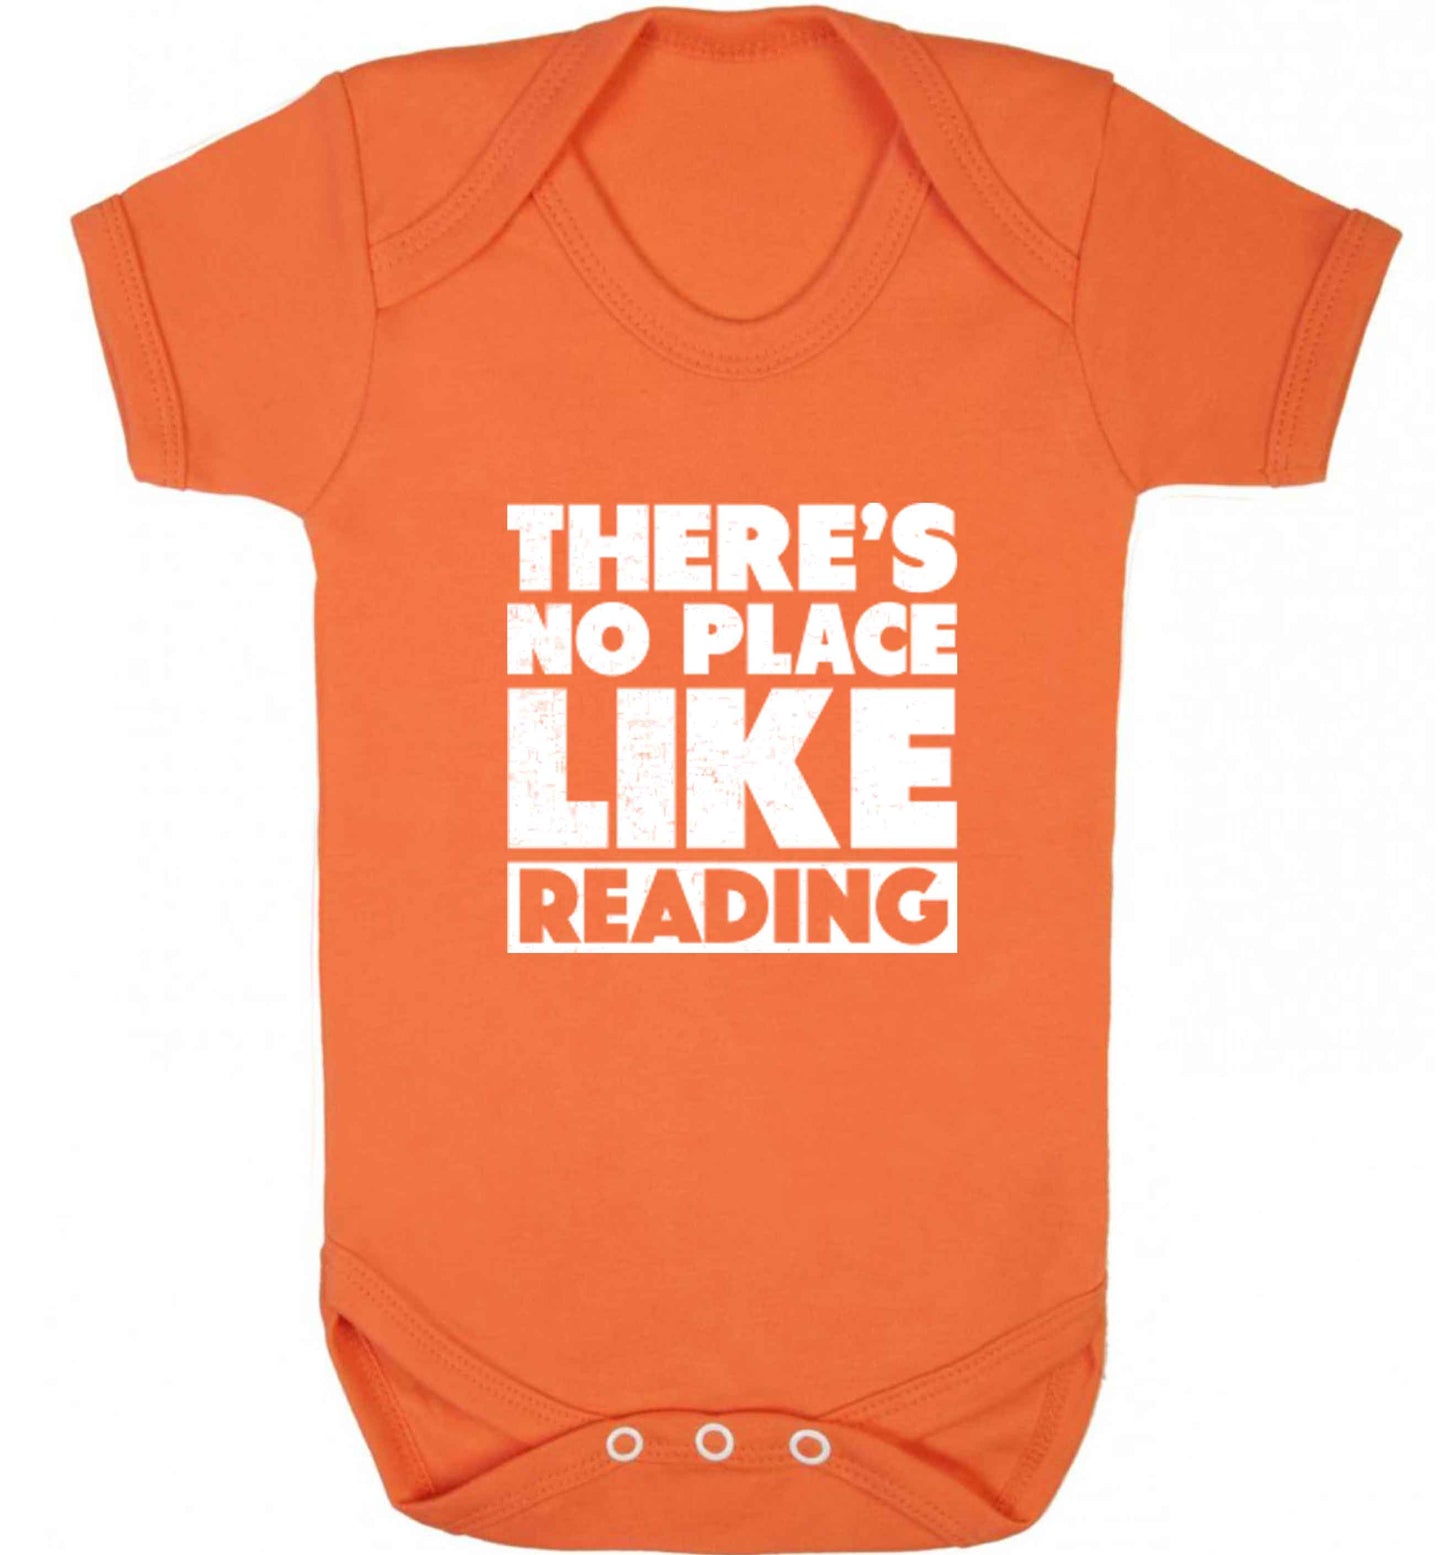 There's no place like Readingbaby vest orange 18-24 months